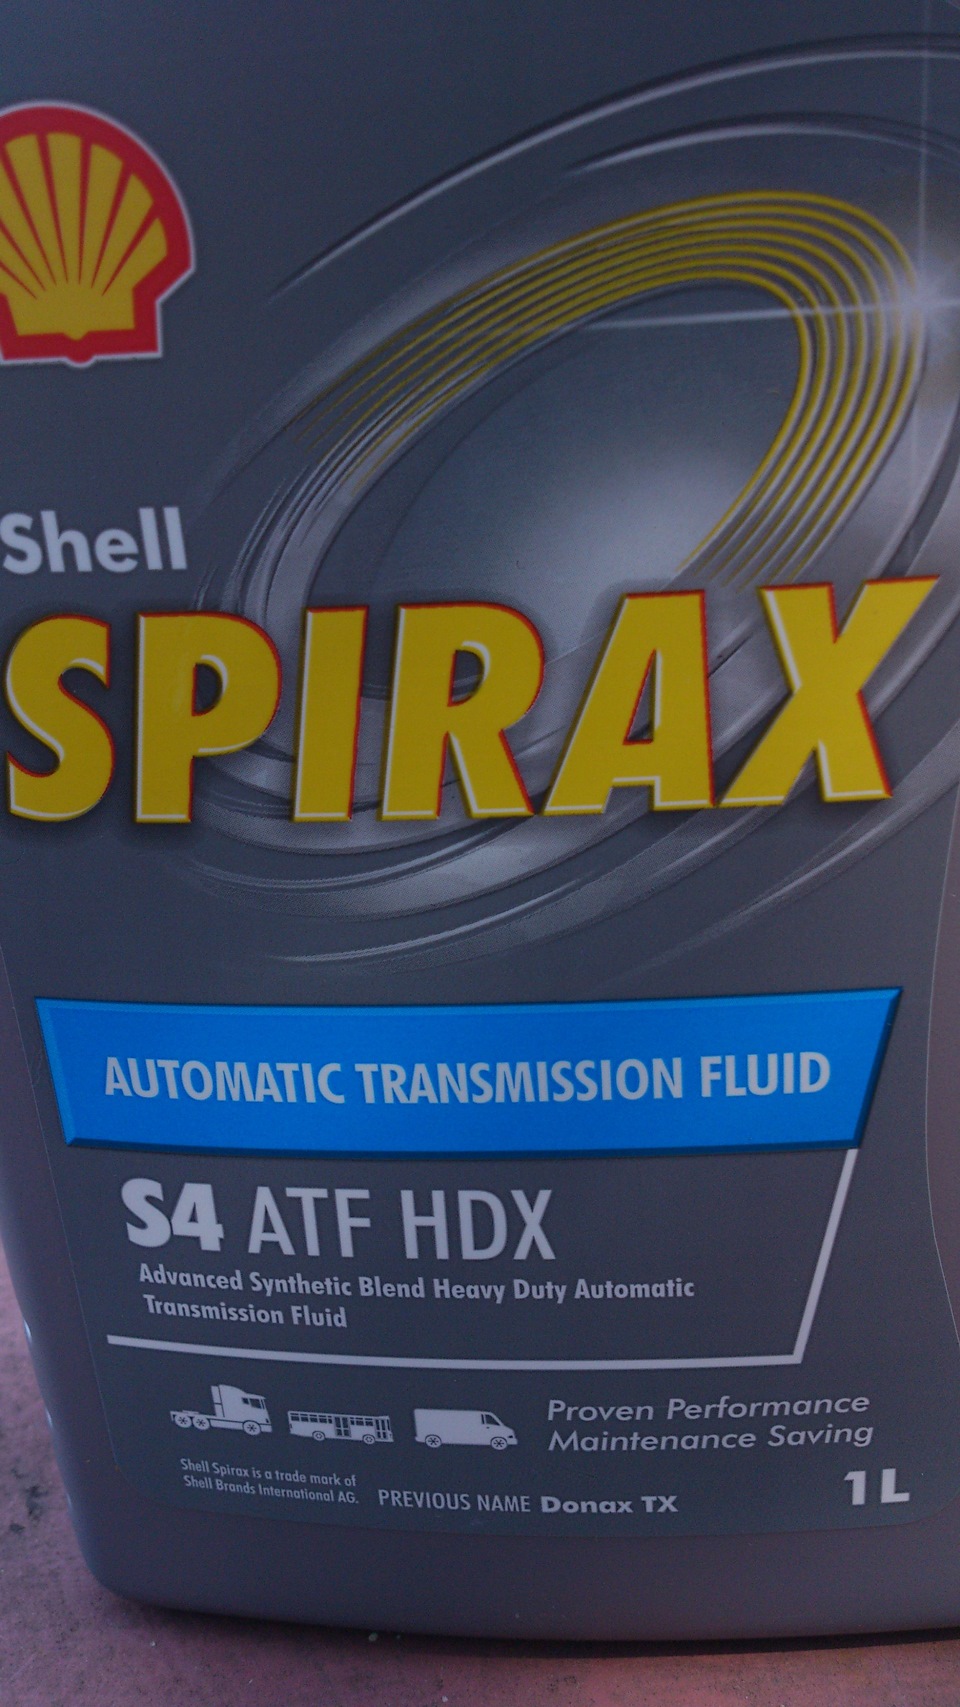 S4 atf hdx. Shell Spirax s4 ATF hdx. Shell Spirax s4 ATF hdx бочка. Shell Spirax s4 ATF hdx drive2. Shell ATF Donax 1 л.